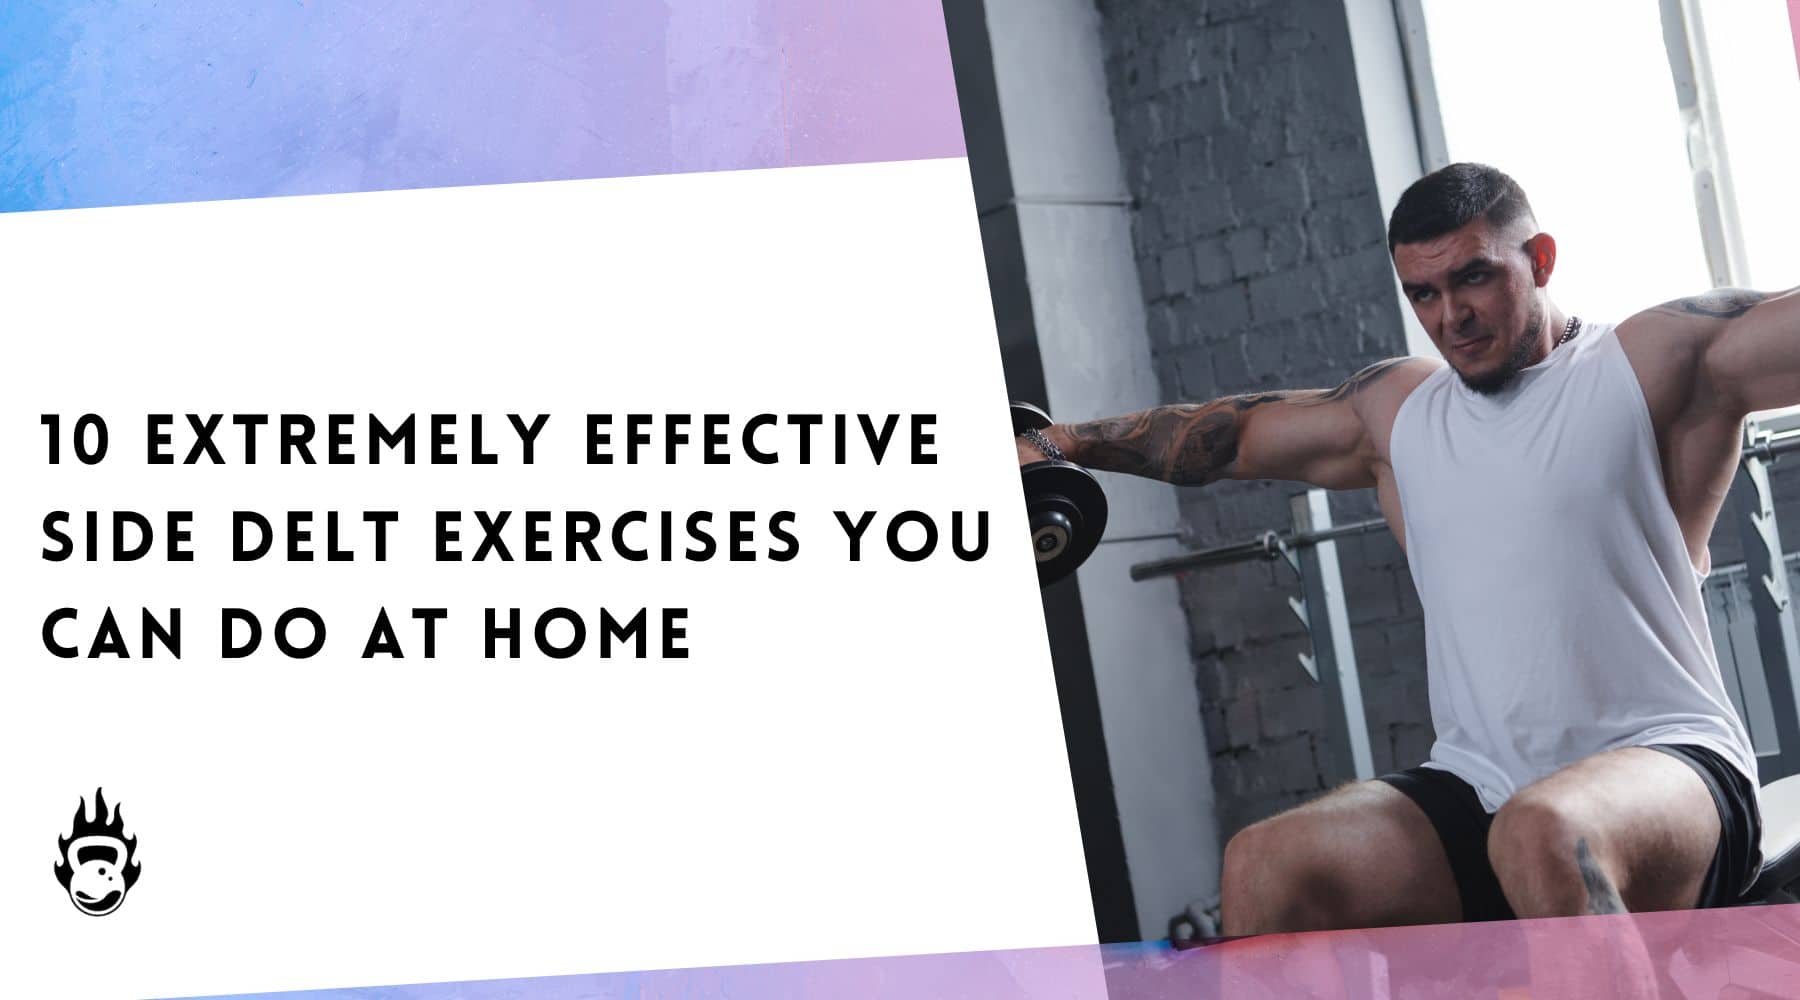 10 Extremely Effective Side Delt Exercises You Can Do At Home